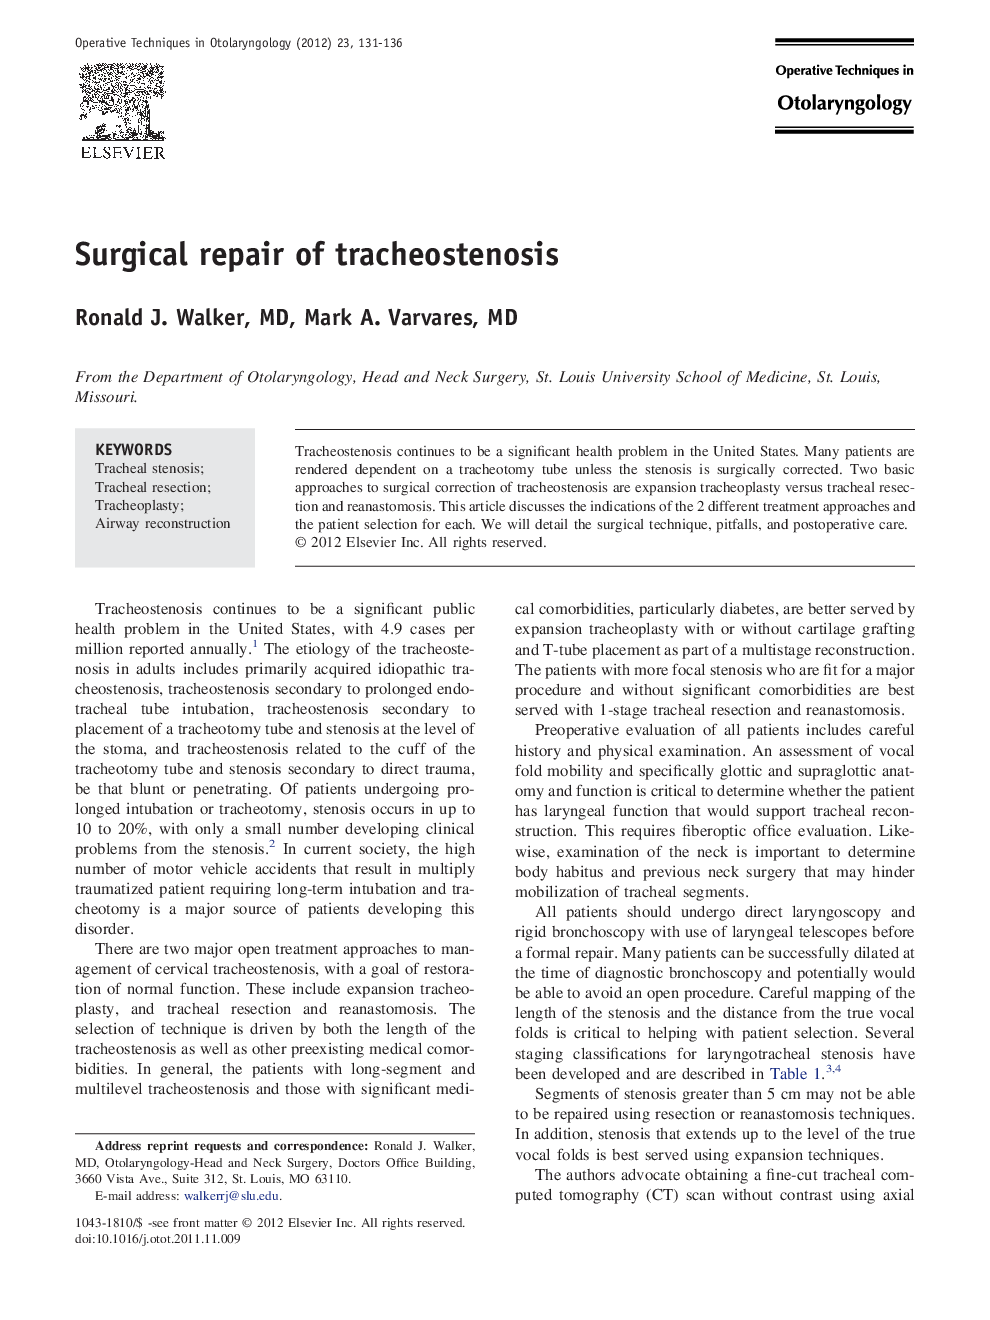 Surgical repair of tracheostenosis